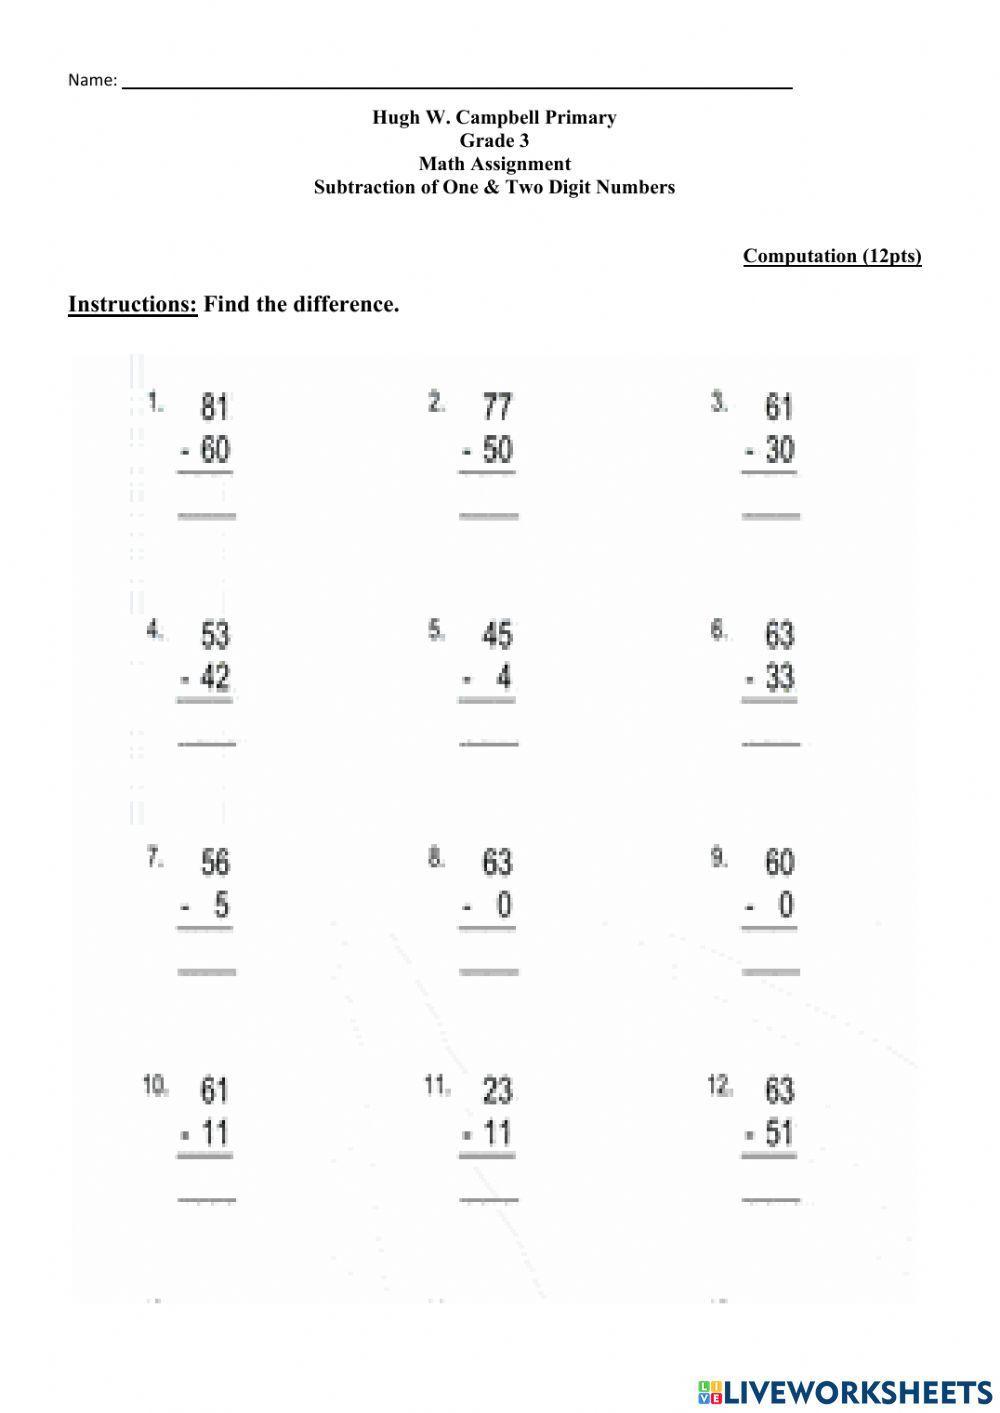 Math Computation Subtract One & Two Digit Numbers